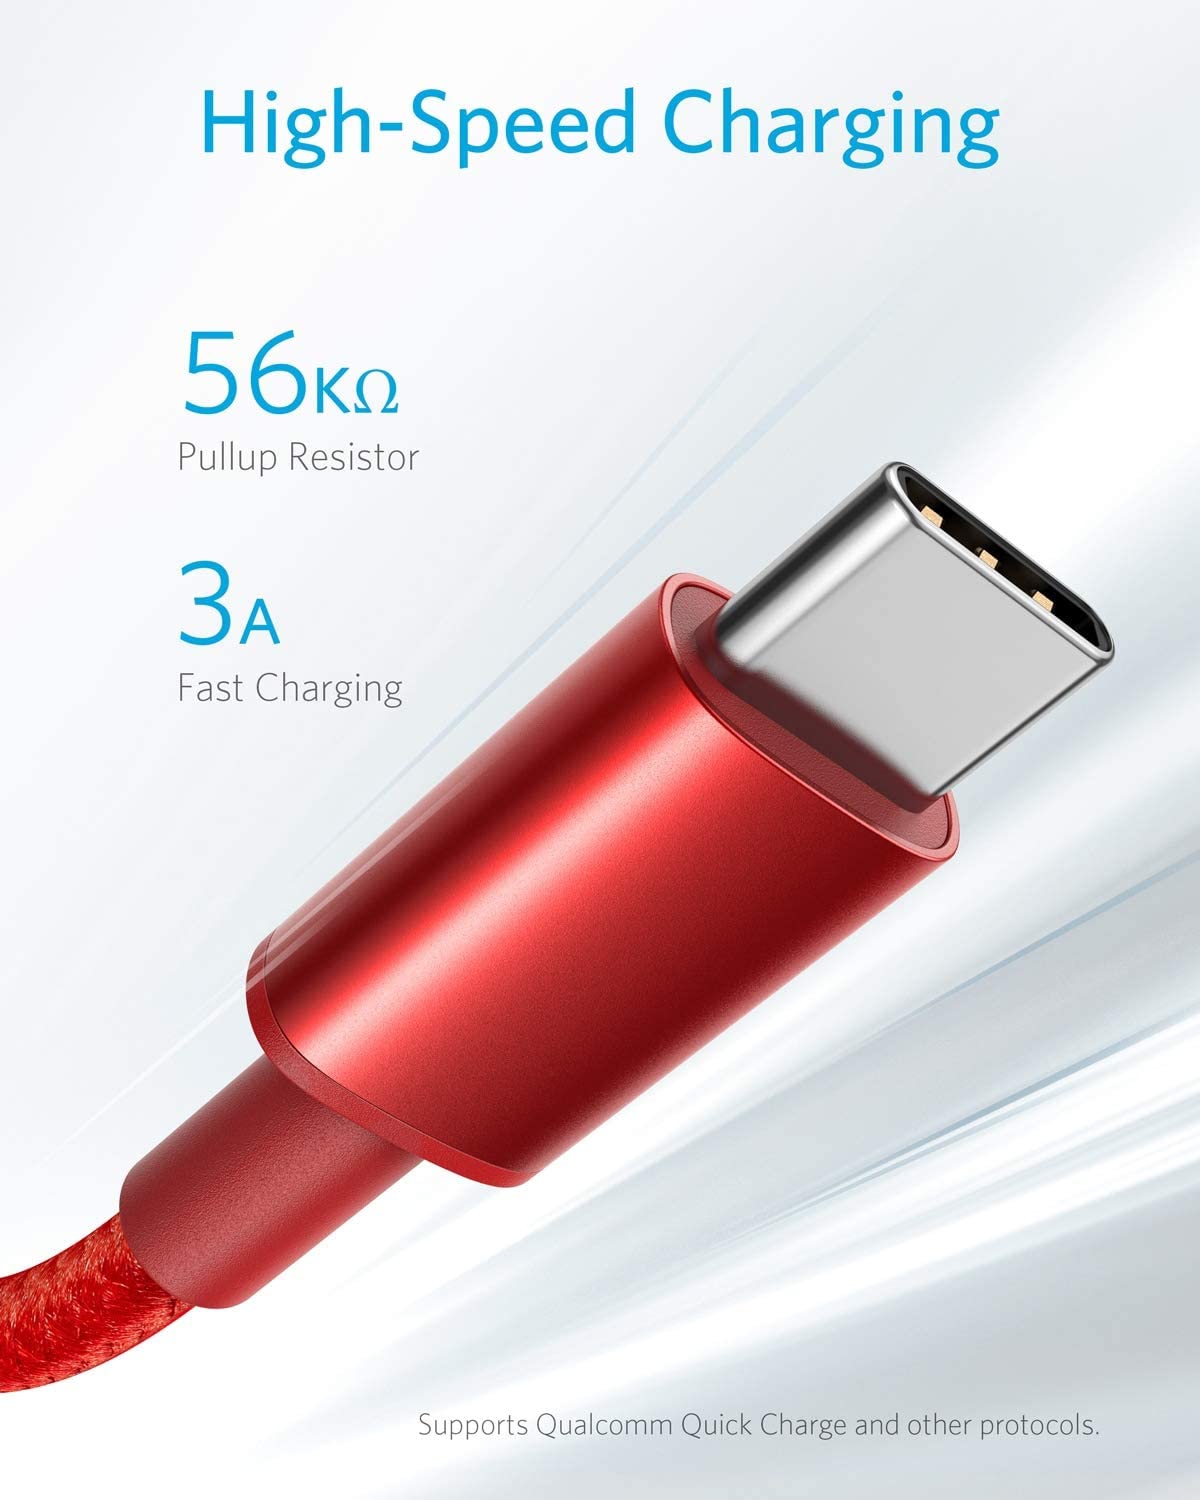 COOLWUFAN USB Type C Cable, [2-Pack 3Ft] Premium Nylon USB-C to USB-A Fast Charging Type C Cable, for Samsung Galaxy S10 / S9 / S8 / Note 8, LG V20 / G5 / G6 and More(Red)